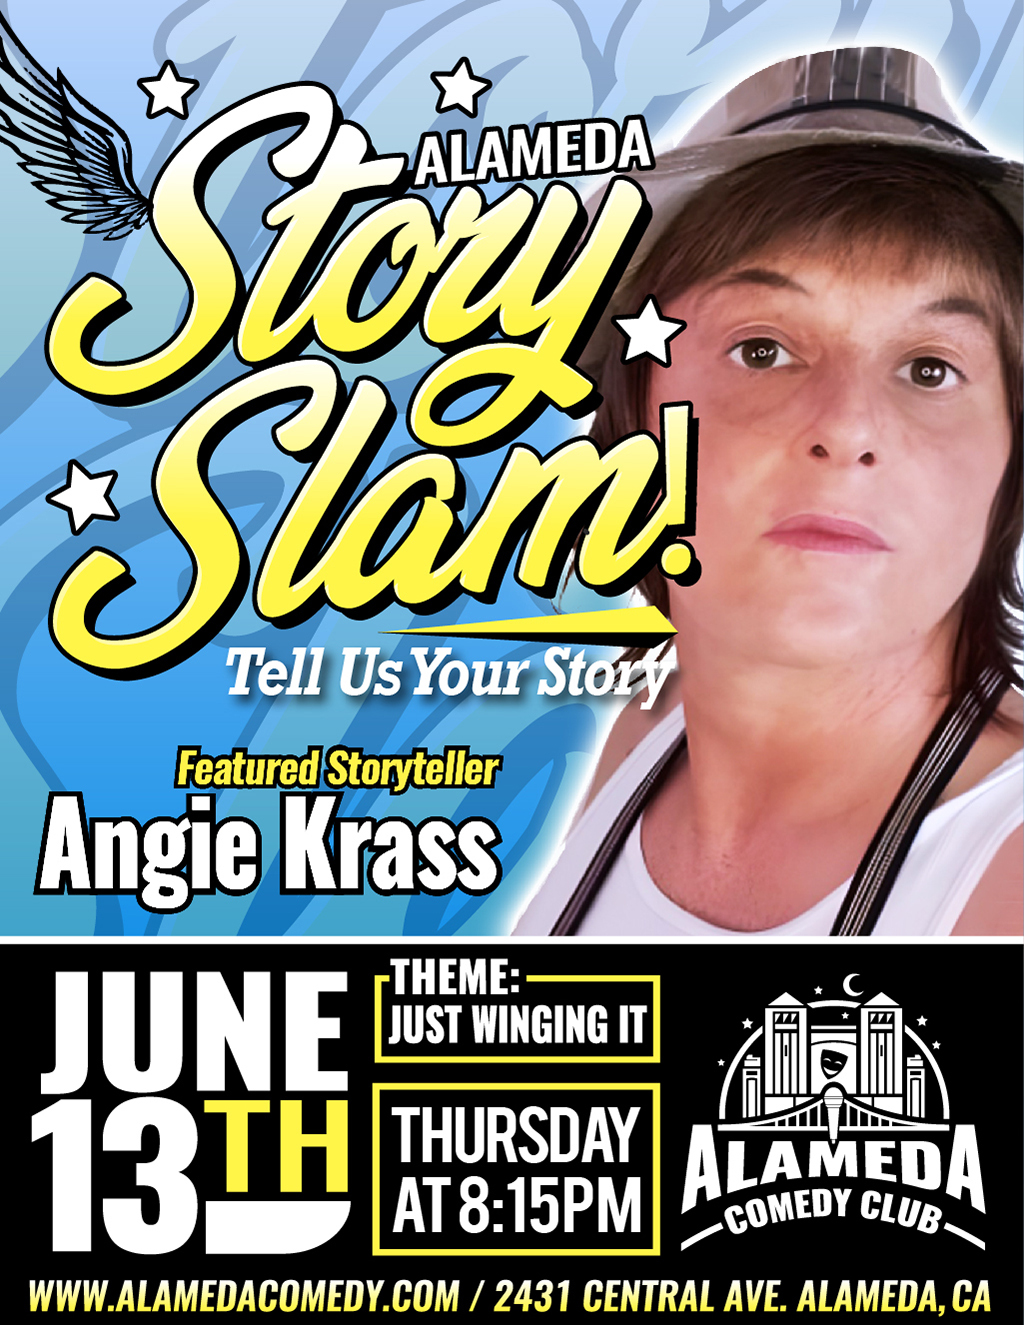 Alameda Comedy Club Get Ready to Laugh and Share at Alameda Story Slam  promotion flier on Digifli com